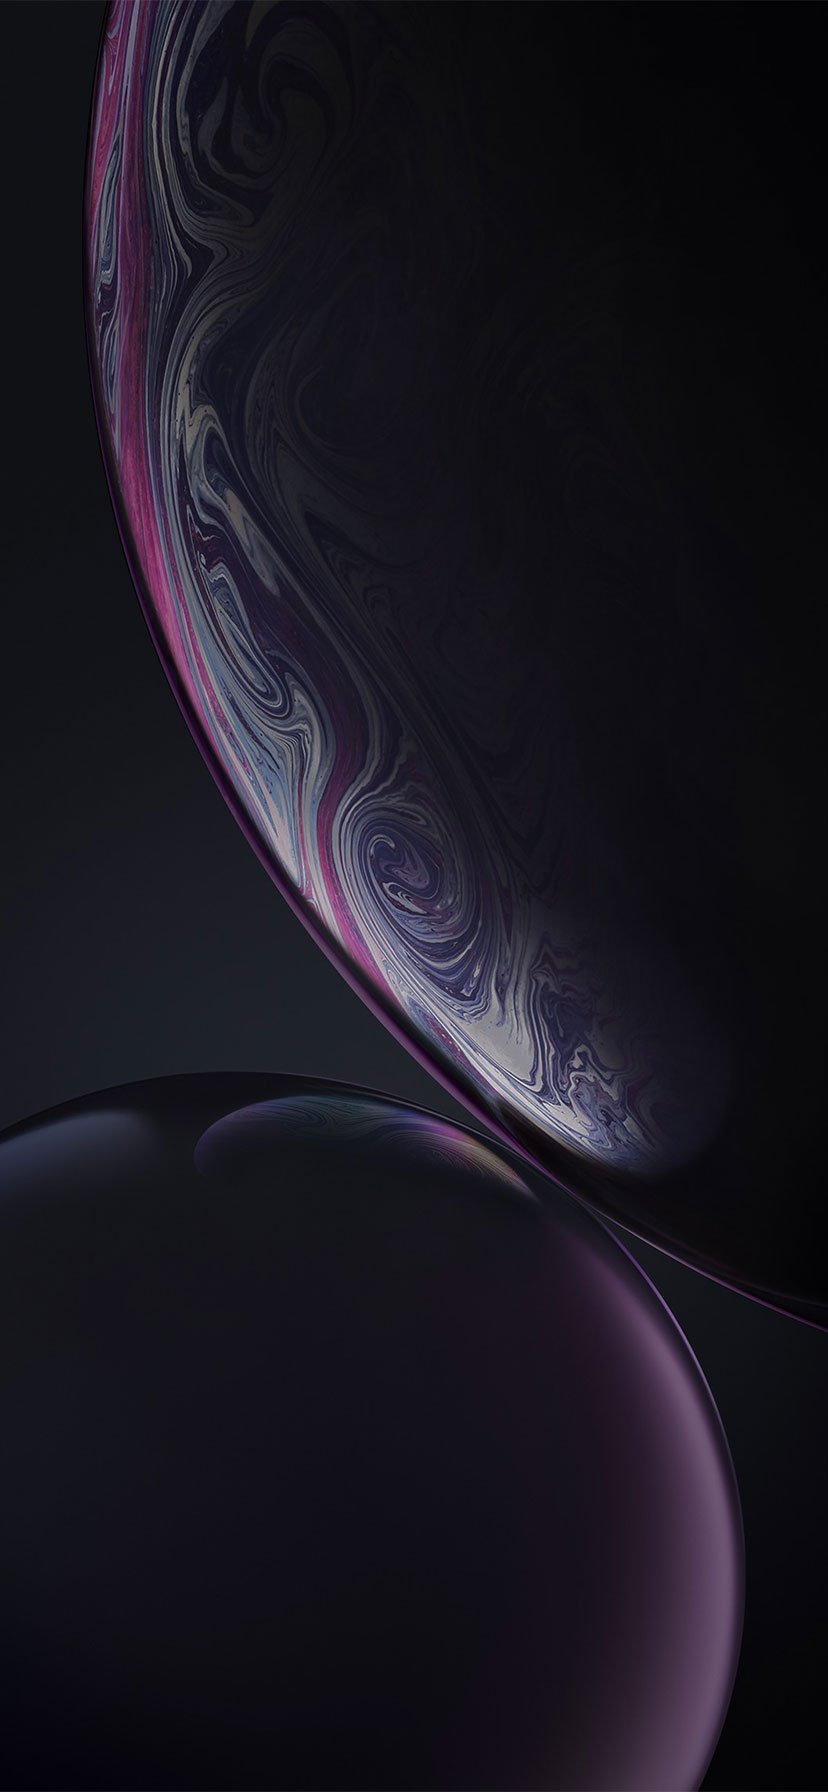 50 Best High Quality iPhone XR Wallpapers amp Backgrounds Designbolts